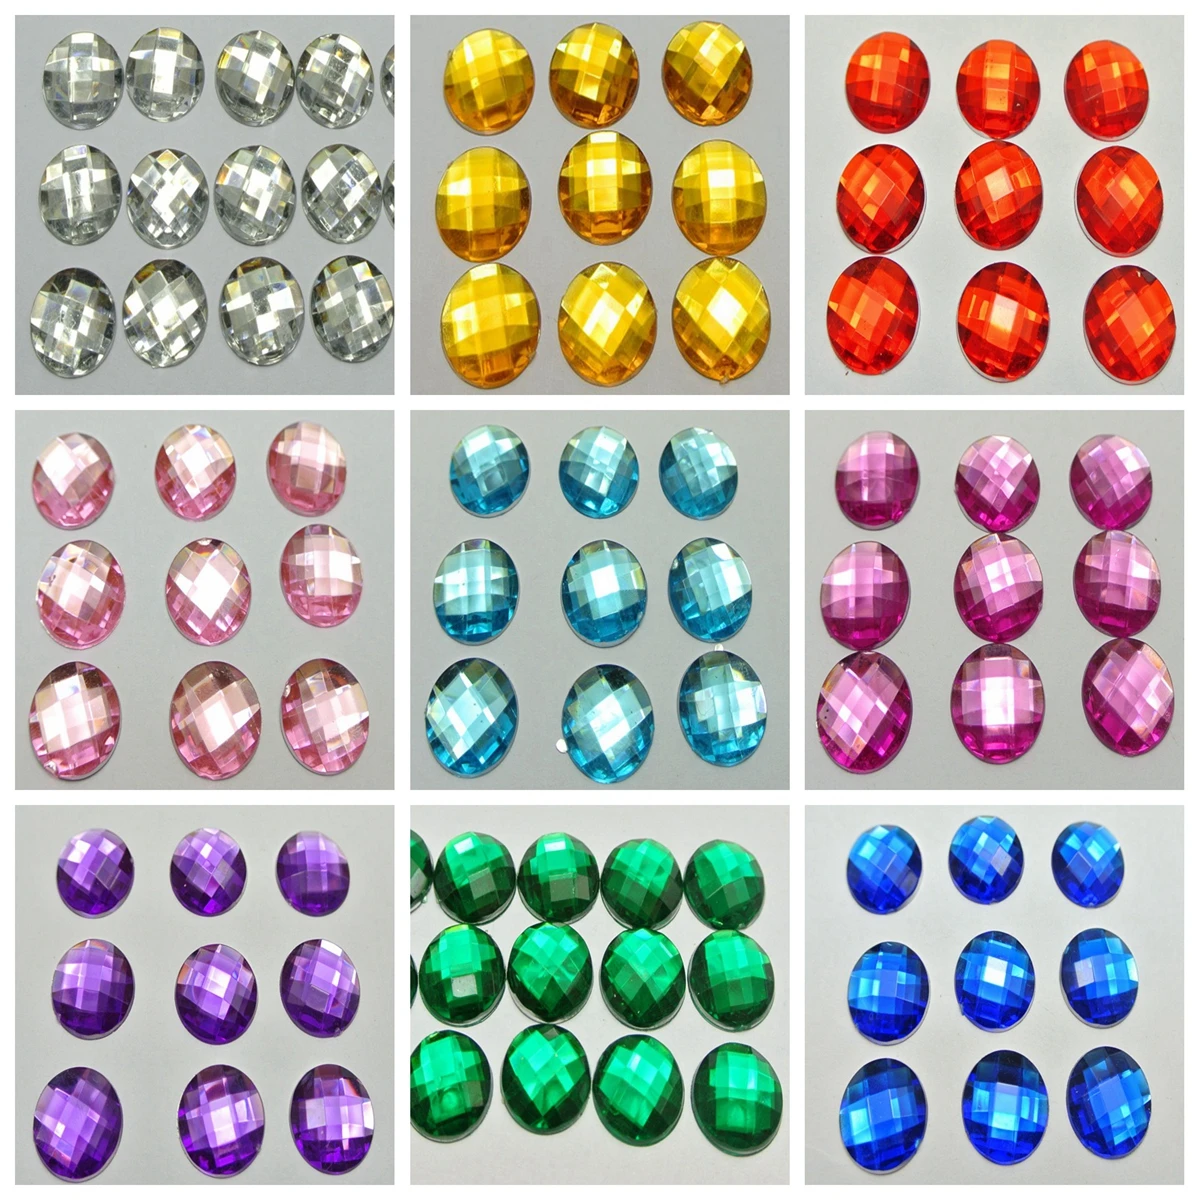 

100 Acrylic Flatback Faceted Round Rhinestone Gems 16mm No Hole Color for Choice